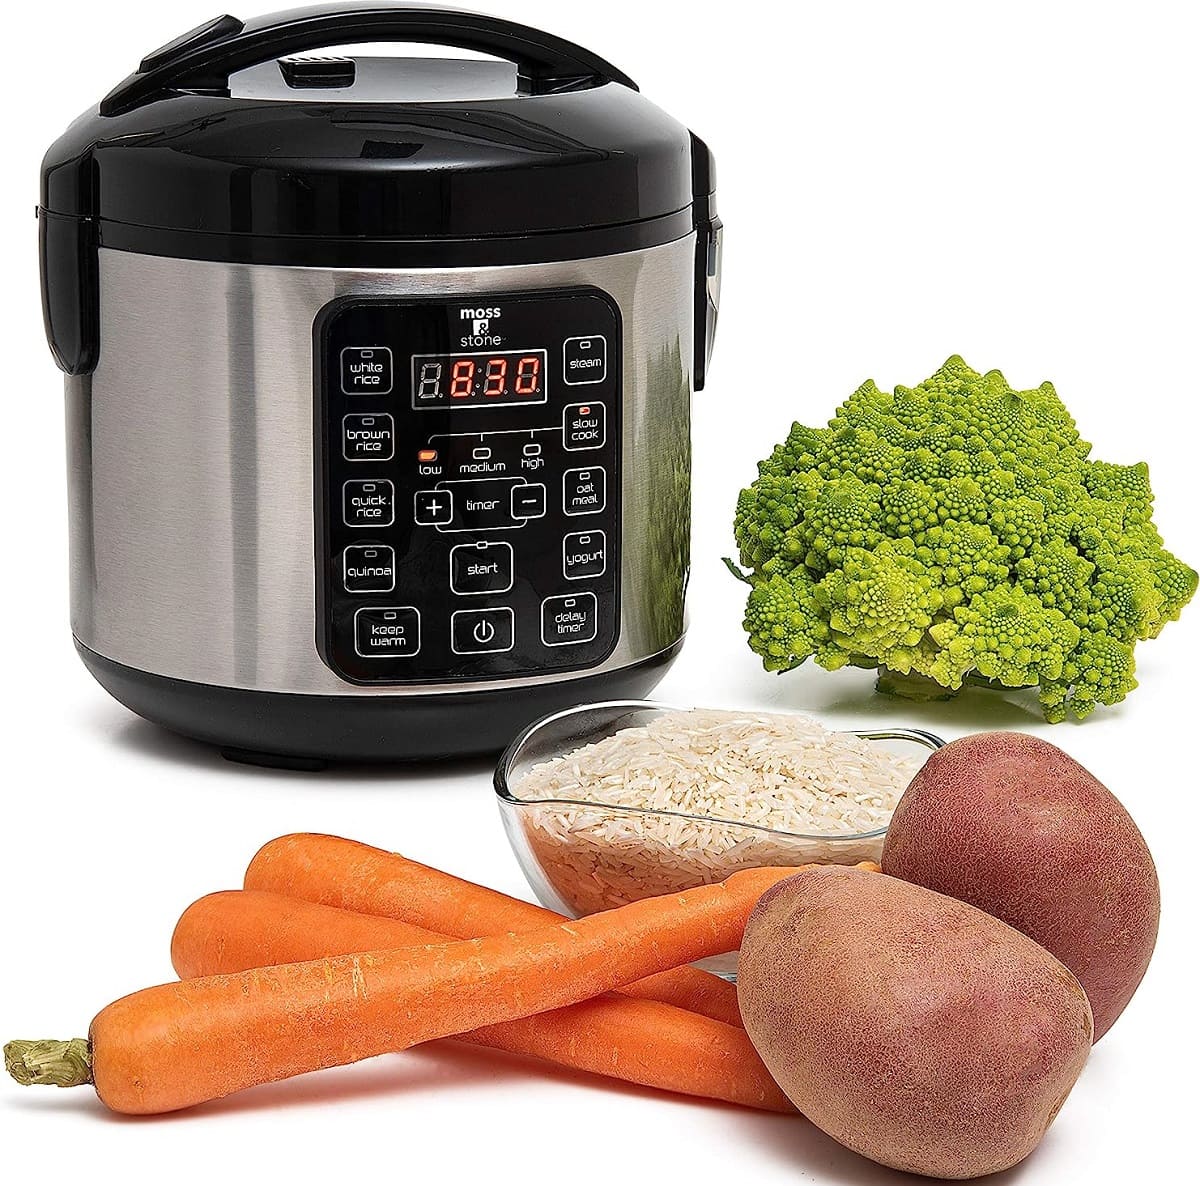 How Long Does It Take To Cook Carrots In A Slow Cooker